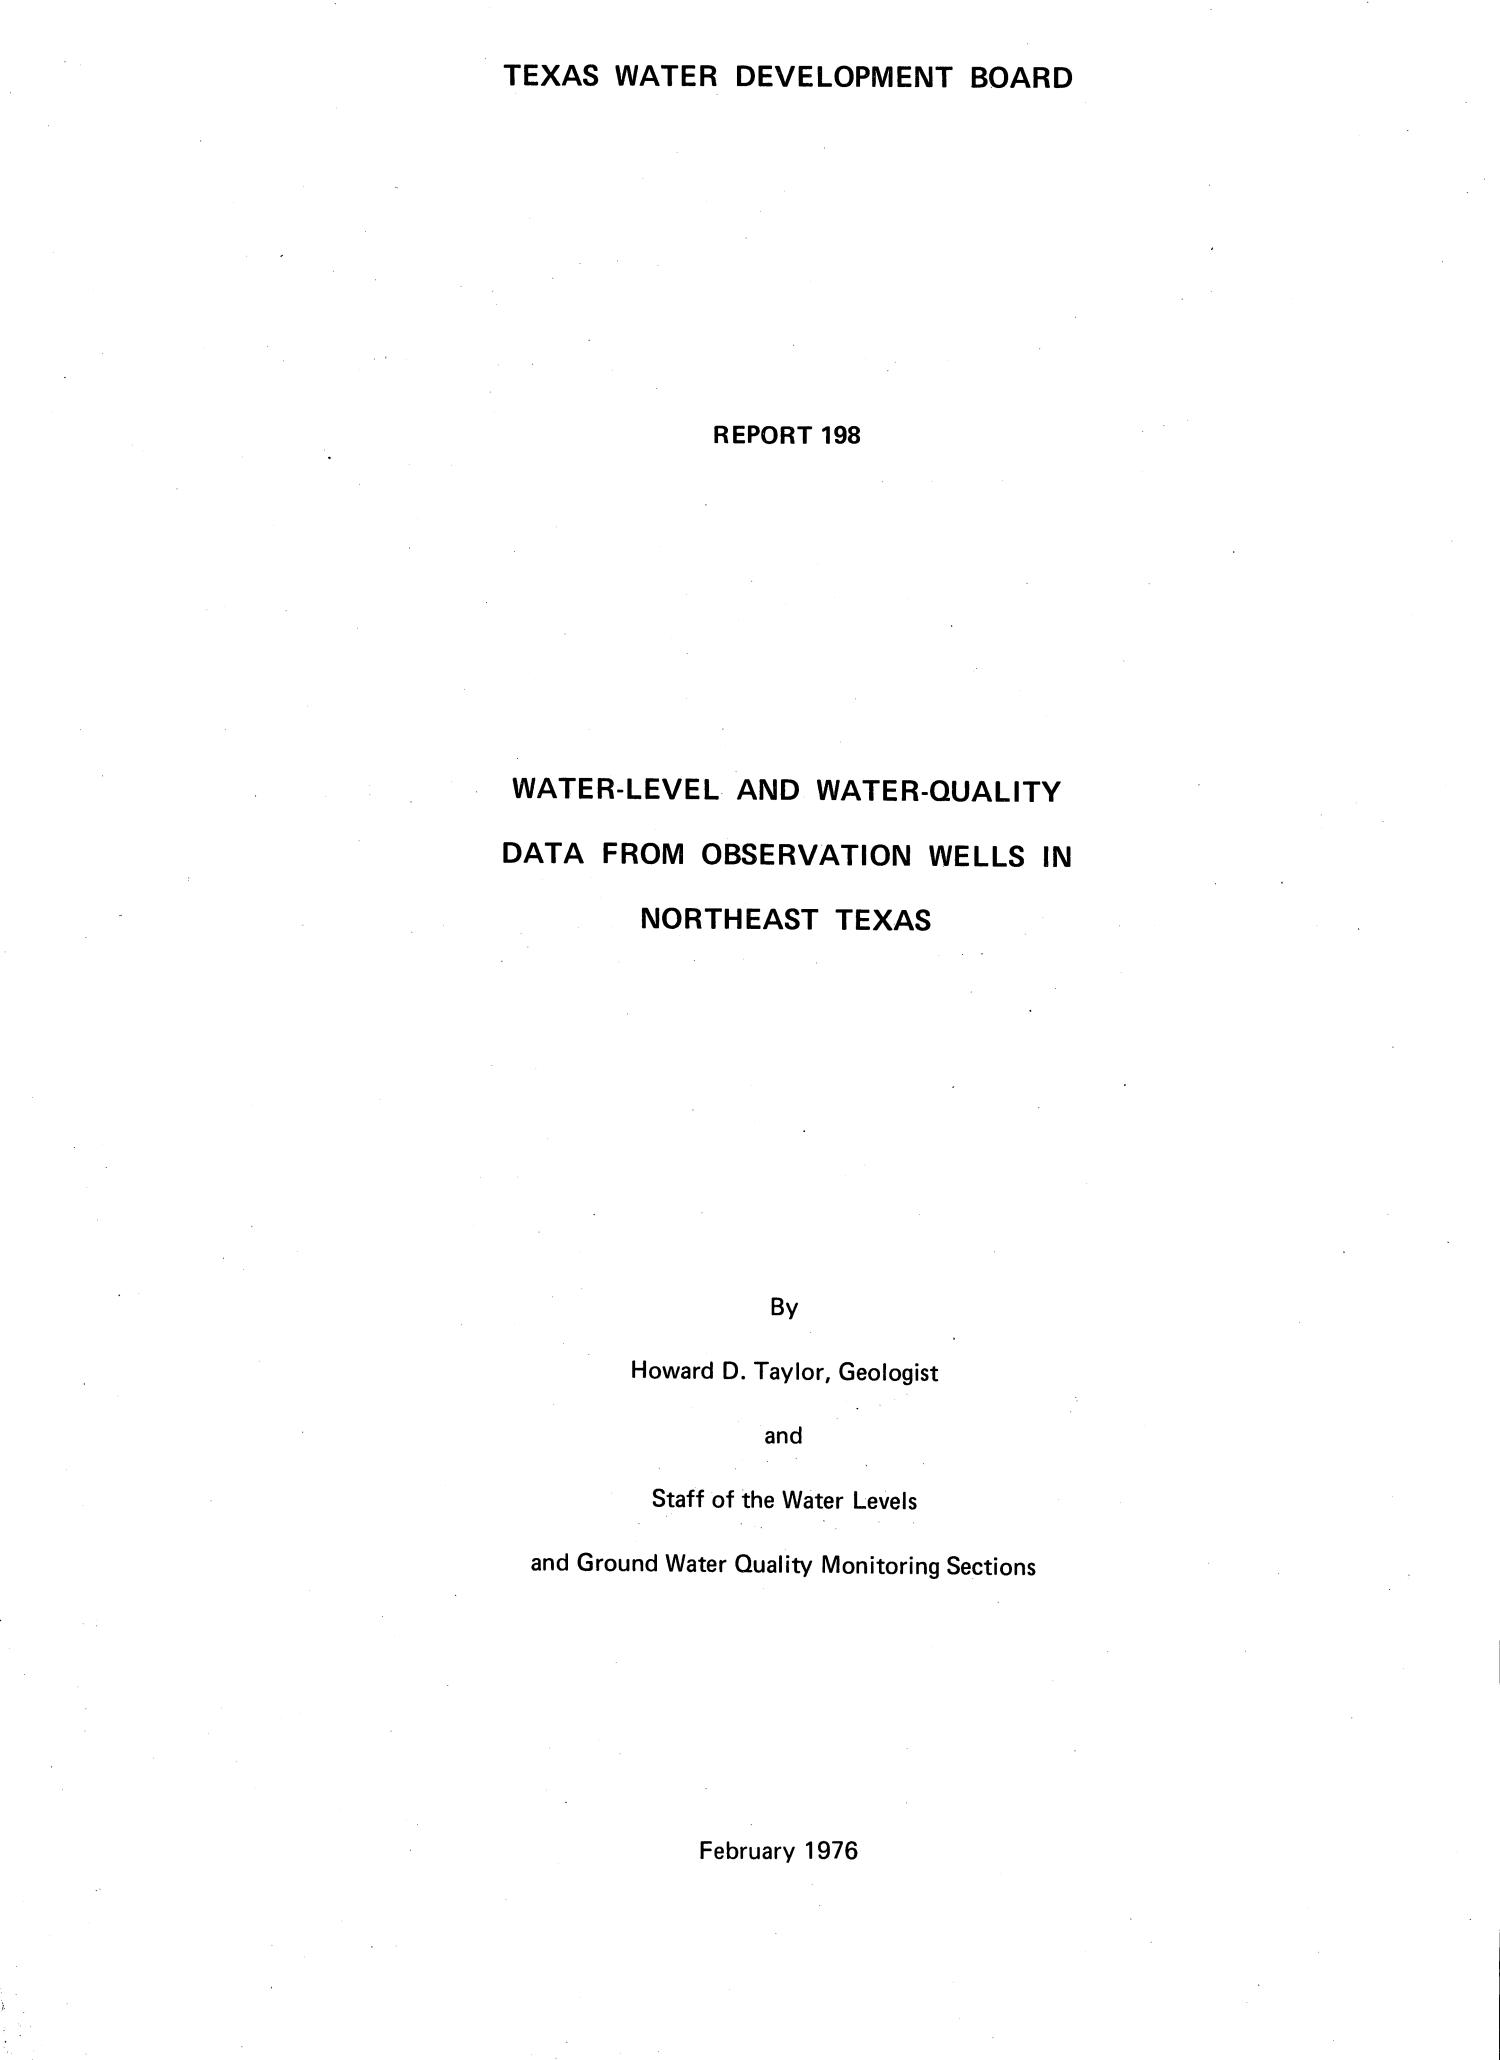 Water Level and Water-Quality Data From Observation Wells in Northeast Texas
                                                
                                                    TITLE PAGE
                                                